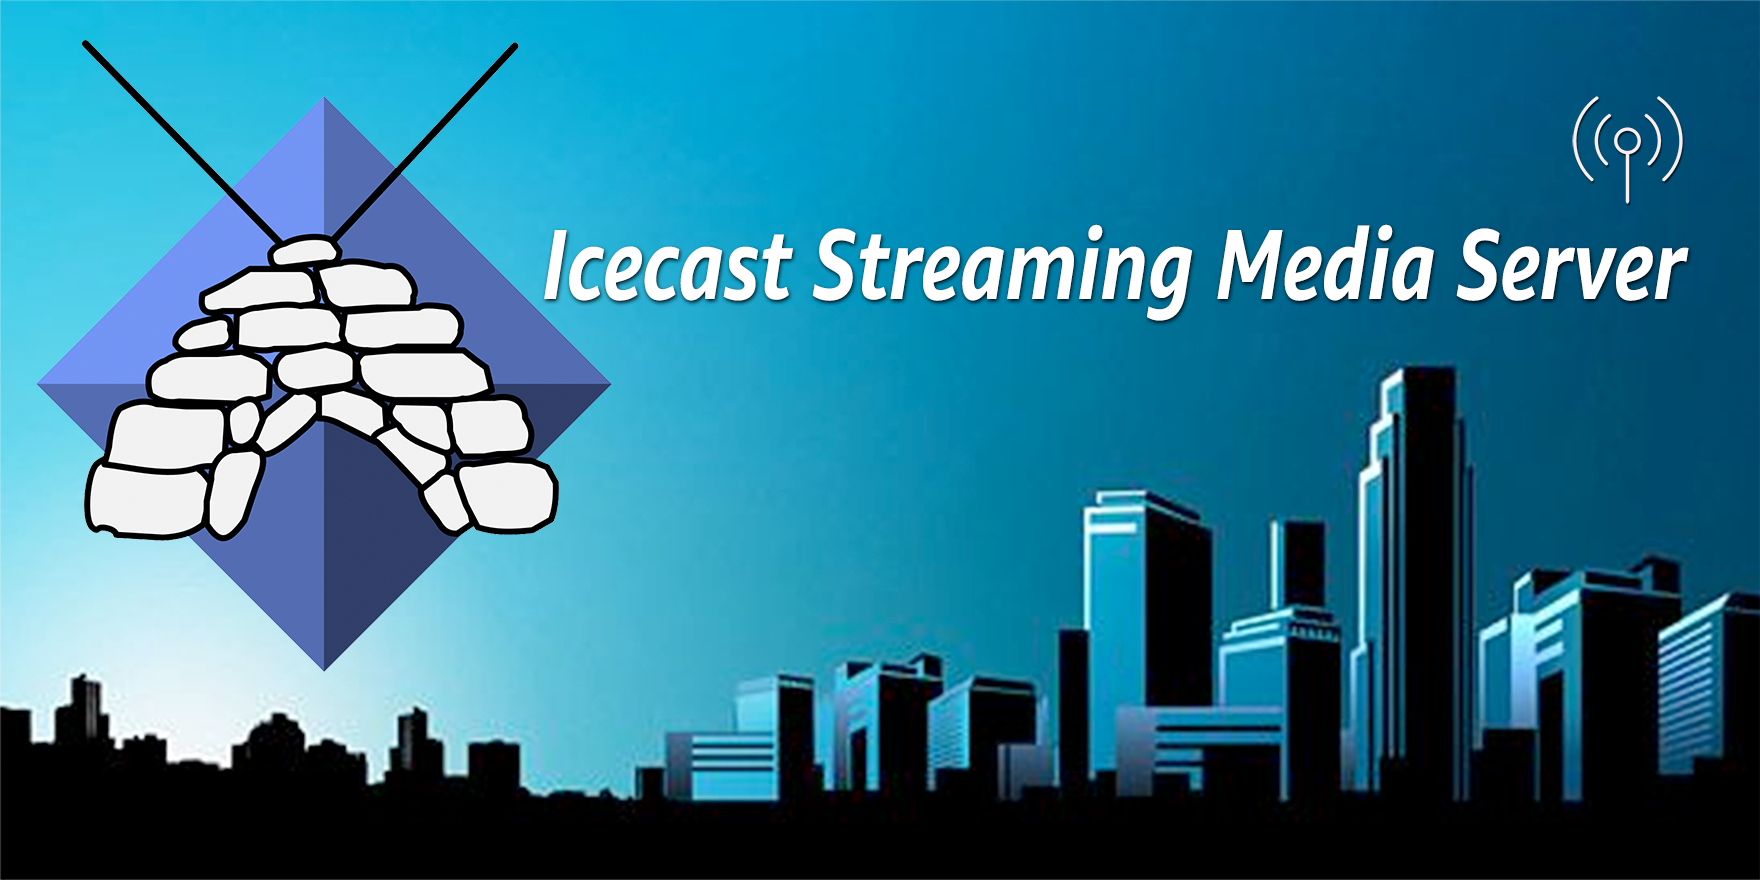 Learn more about Icecast Streaming Media Server